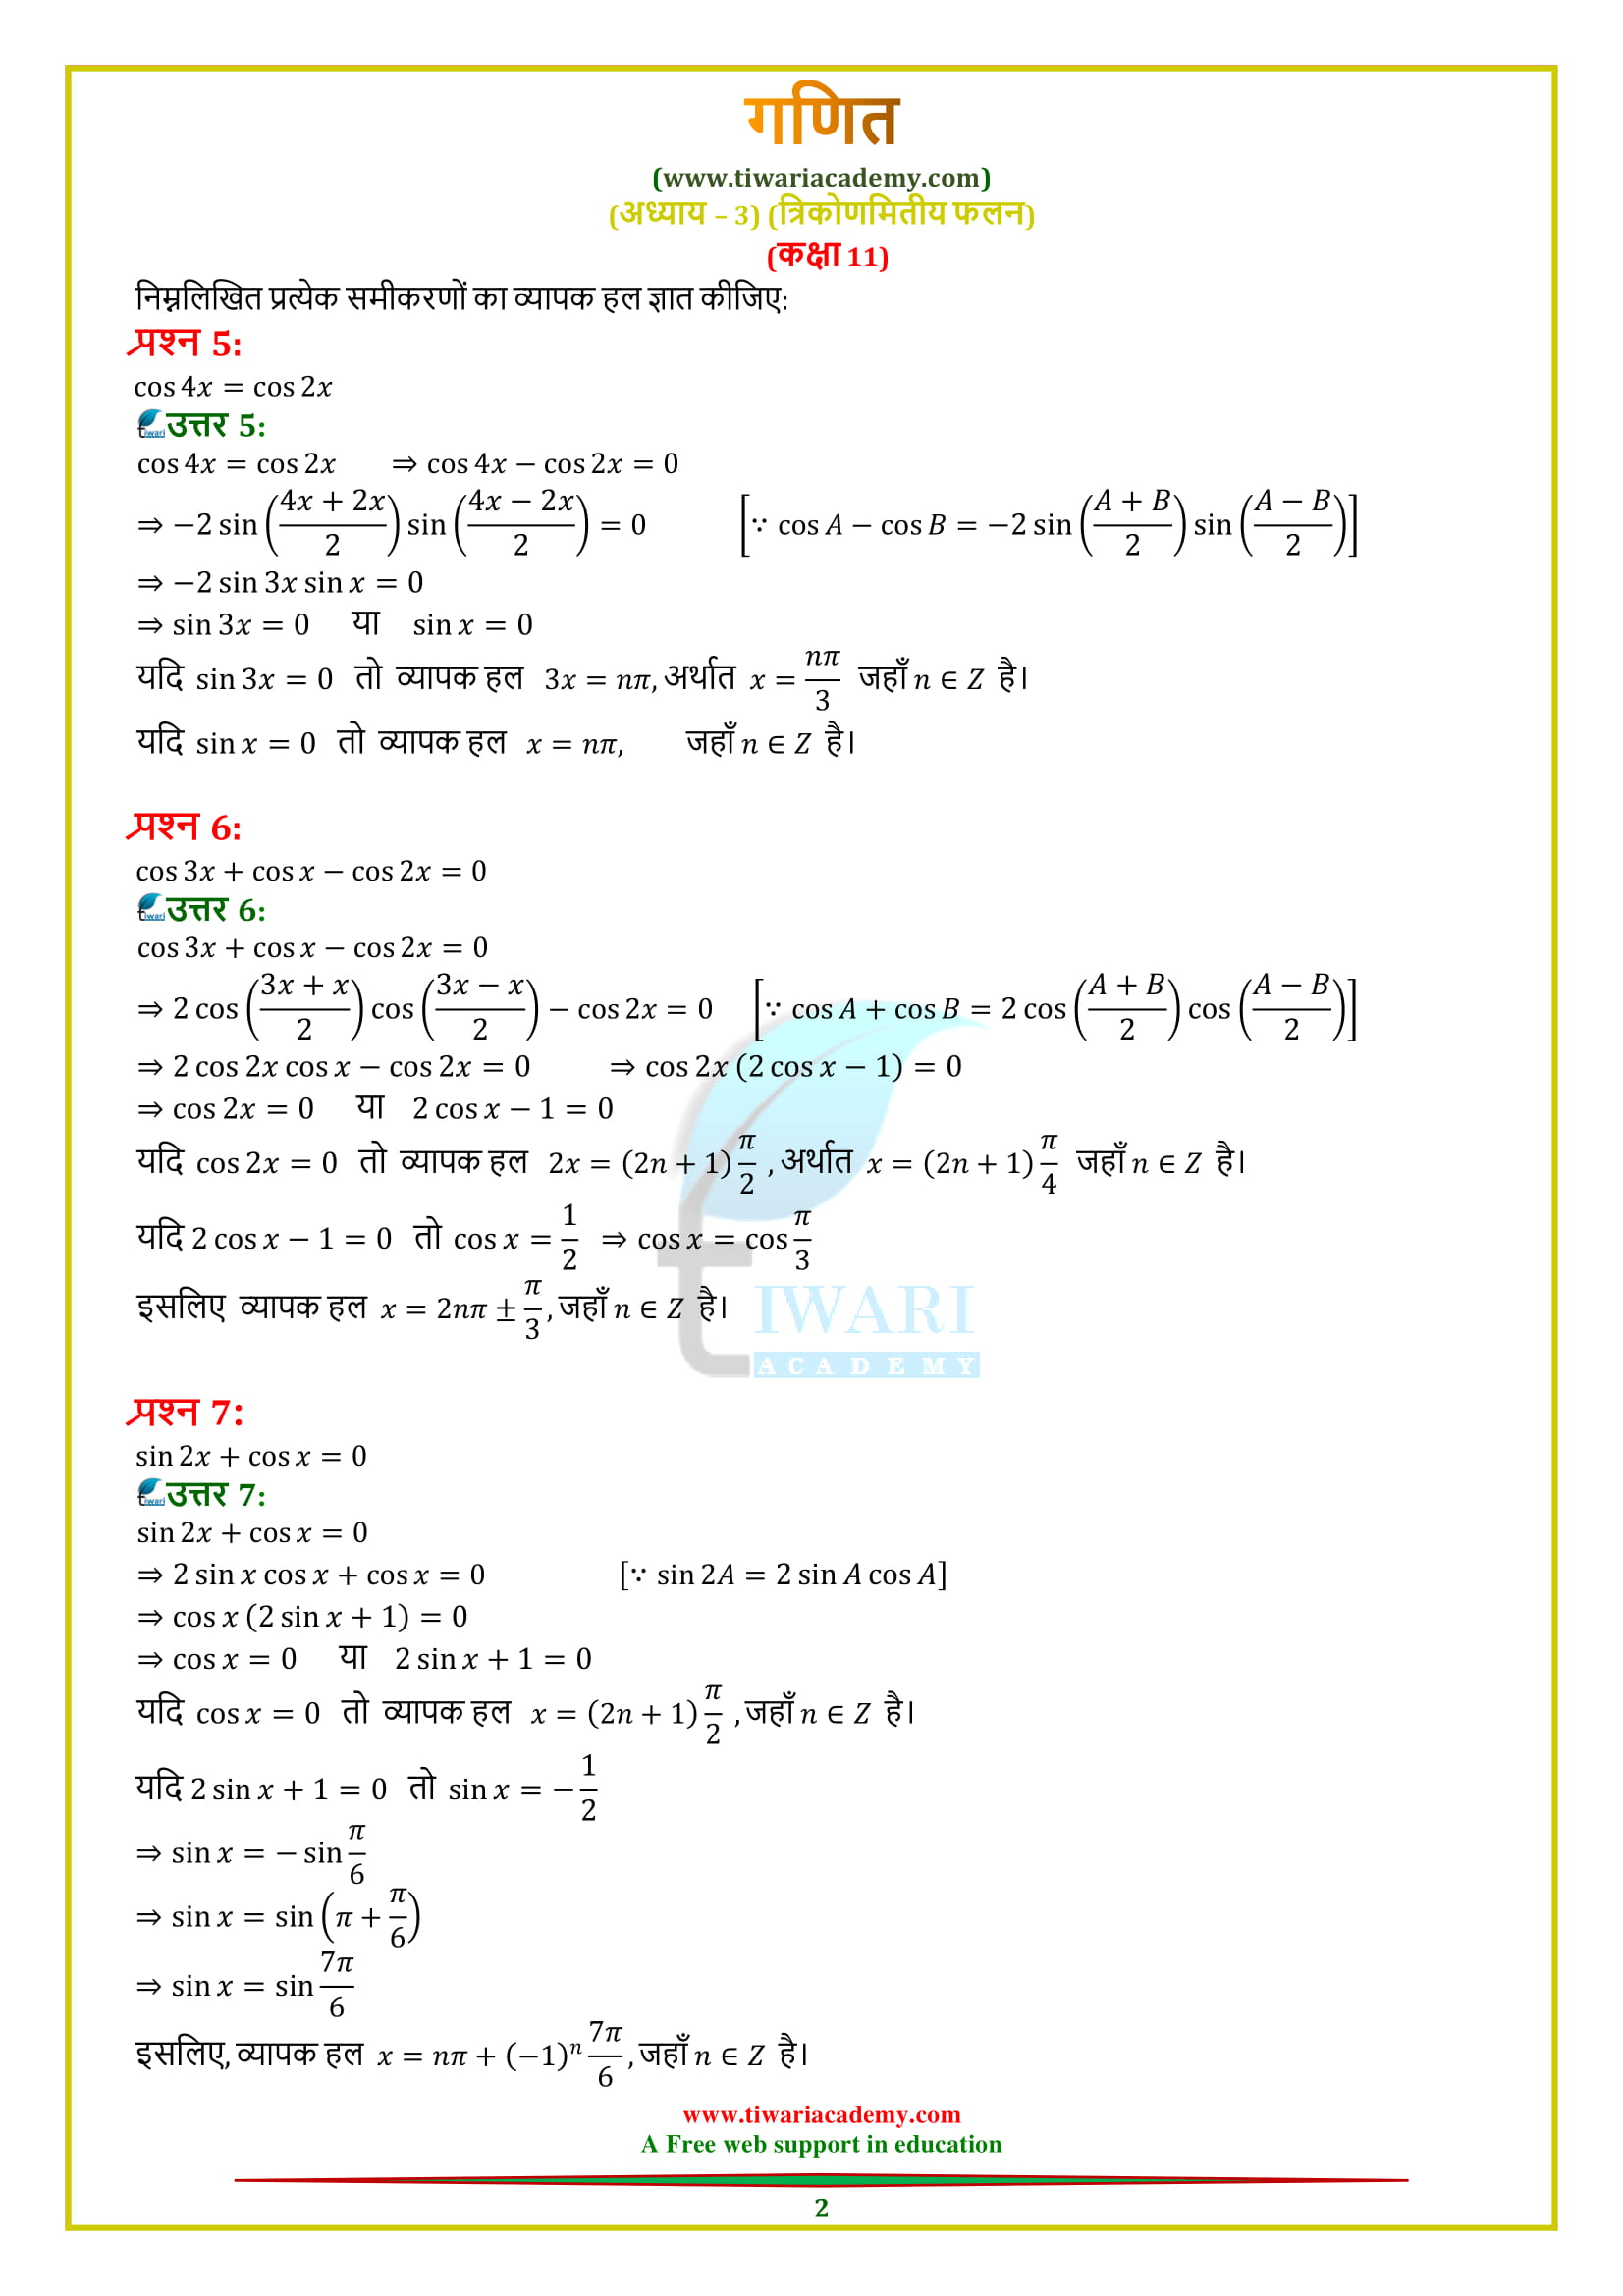 NCERT Solutions for Class 11 Maths Chapter 3 Exercise 3.4 updated for 2018-19.